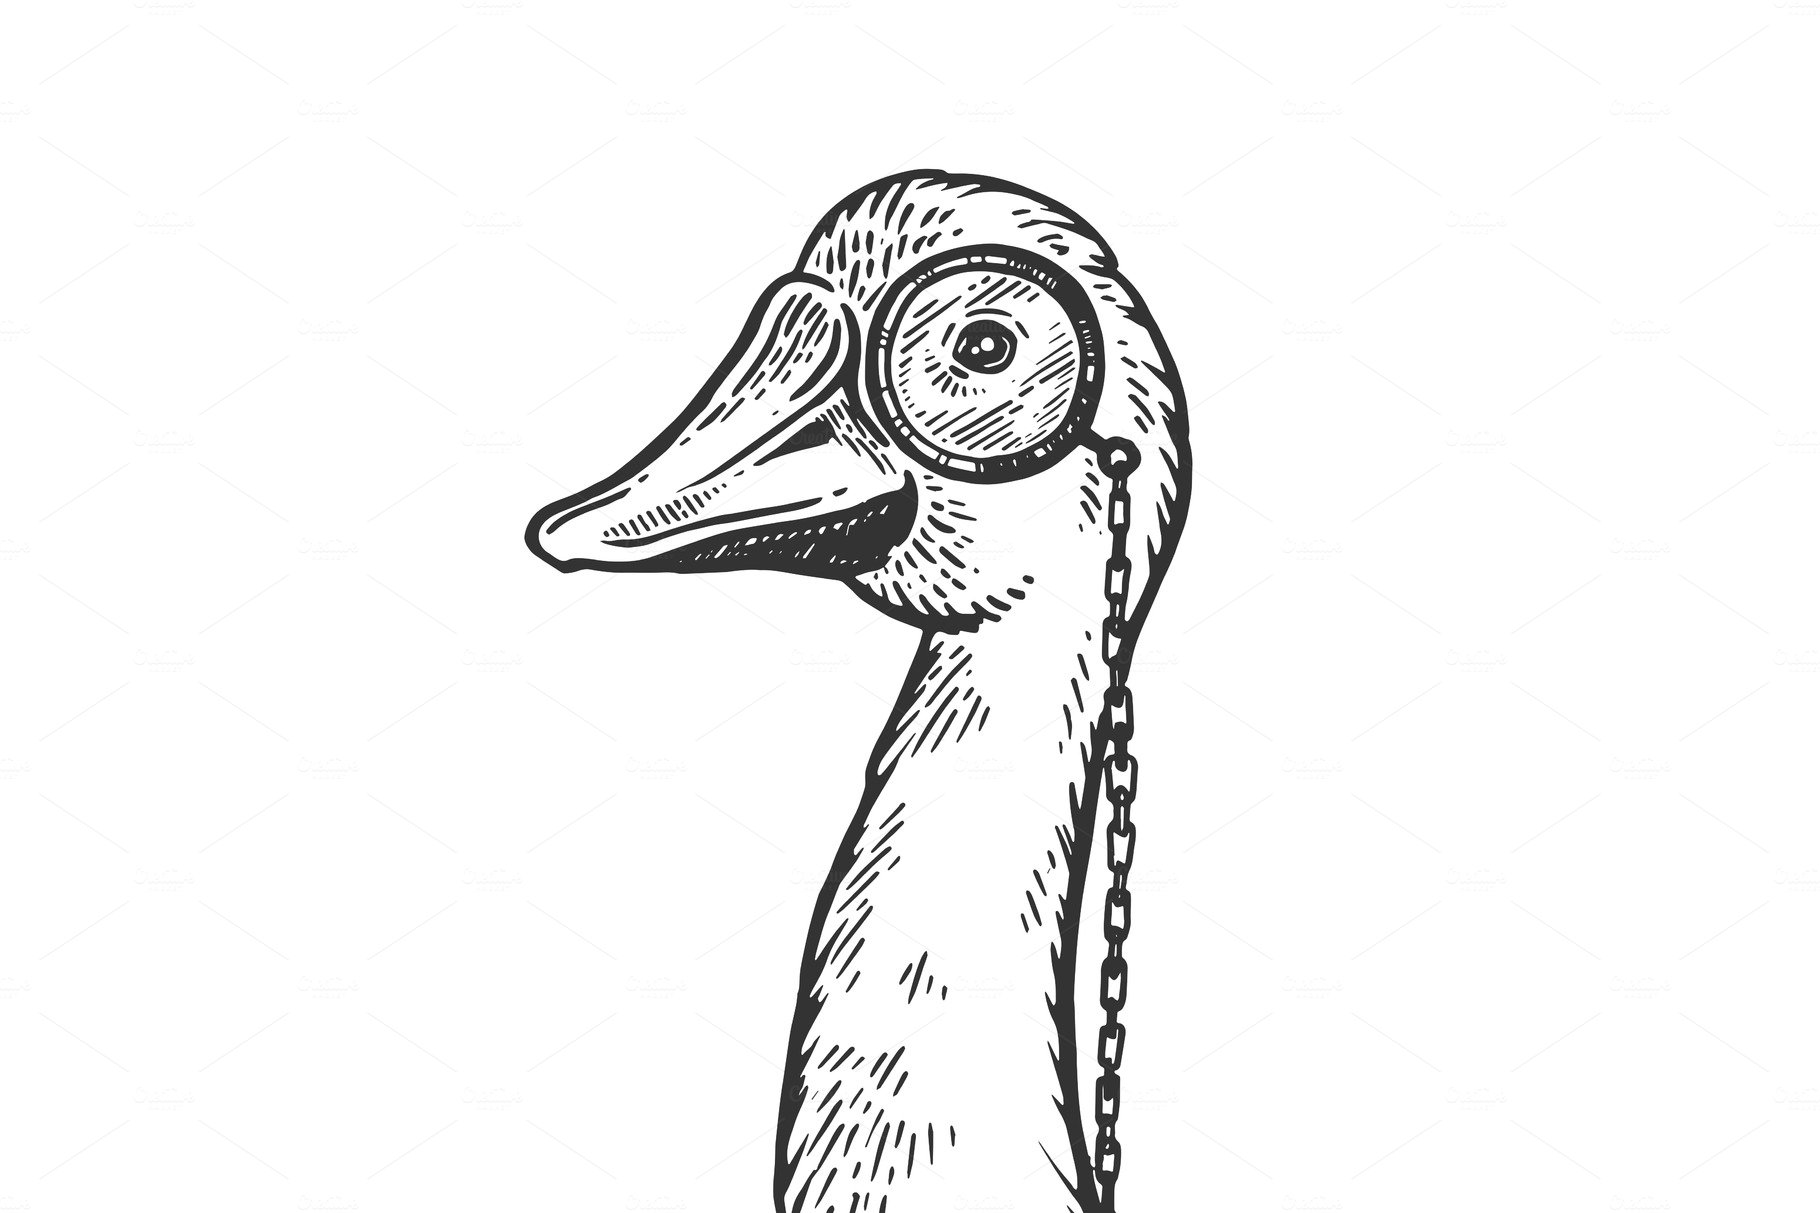 Goose wih monocle engraving vector cover image.